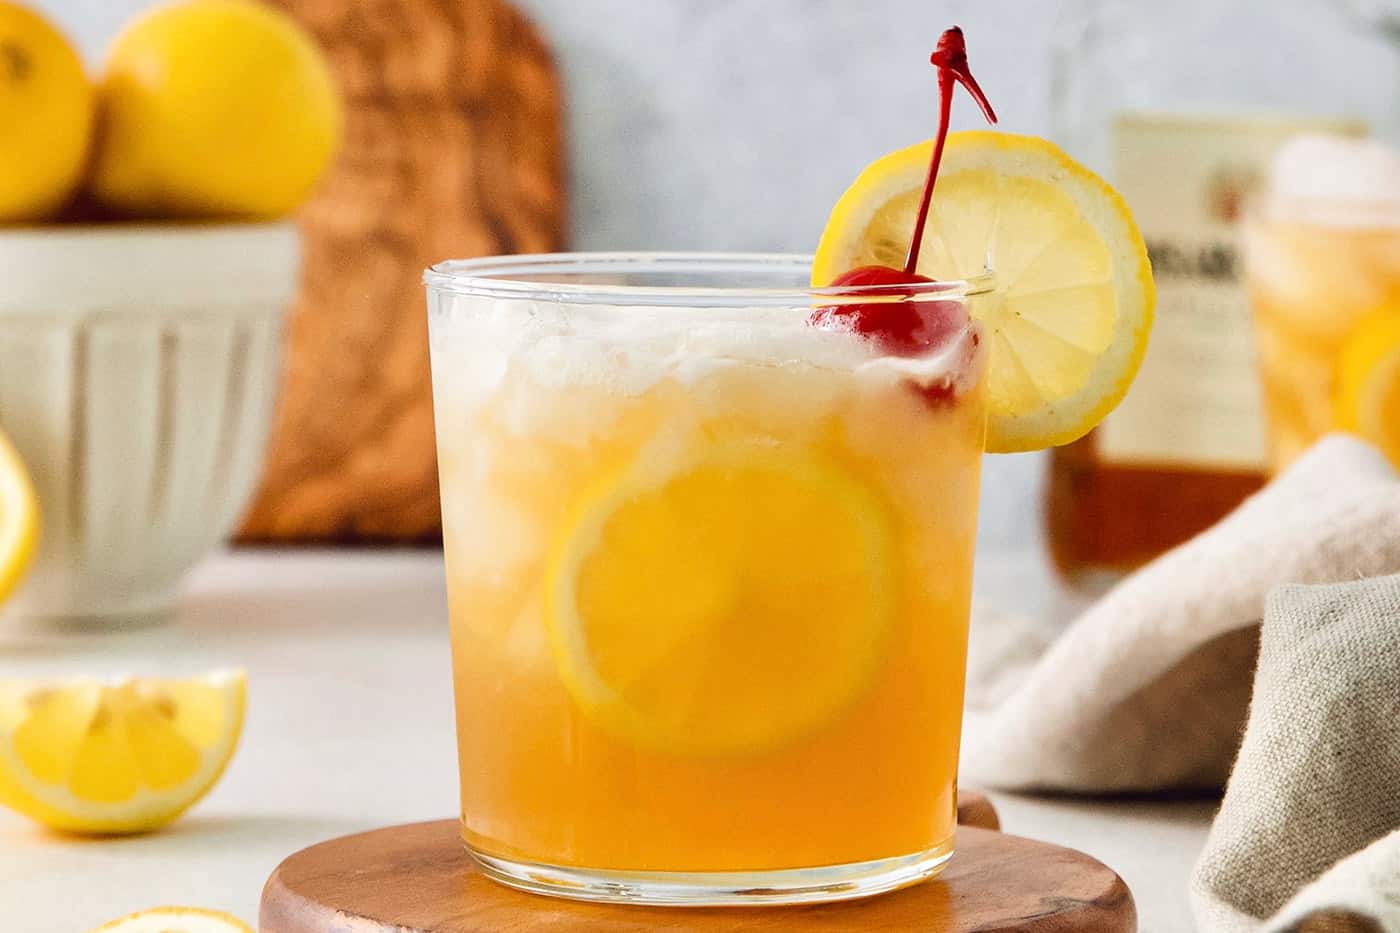 A glass of amaretto sour is garnished with a cherry and a slice of lemon on a wooden circle.